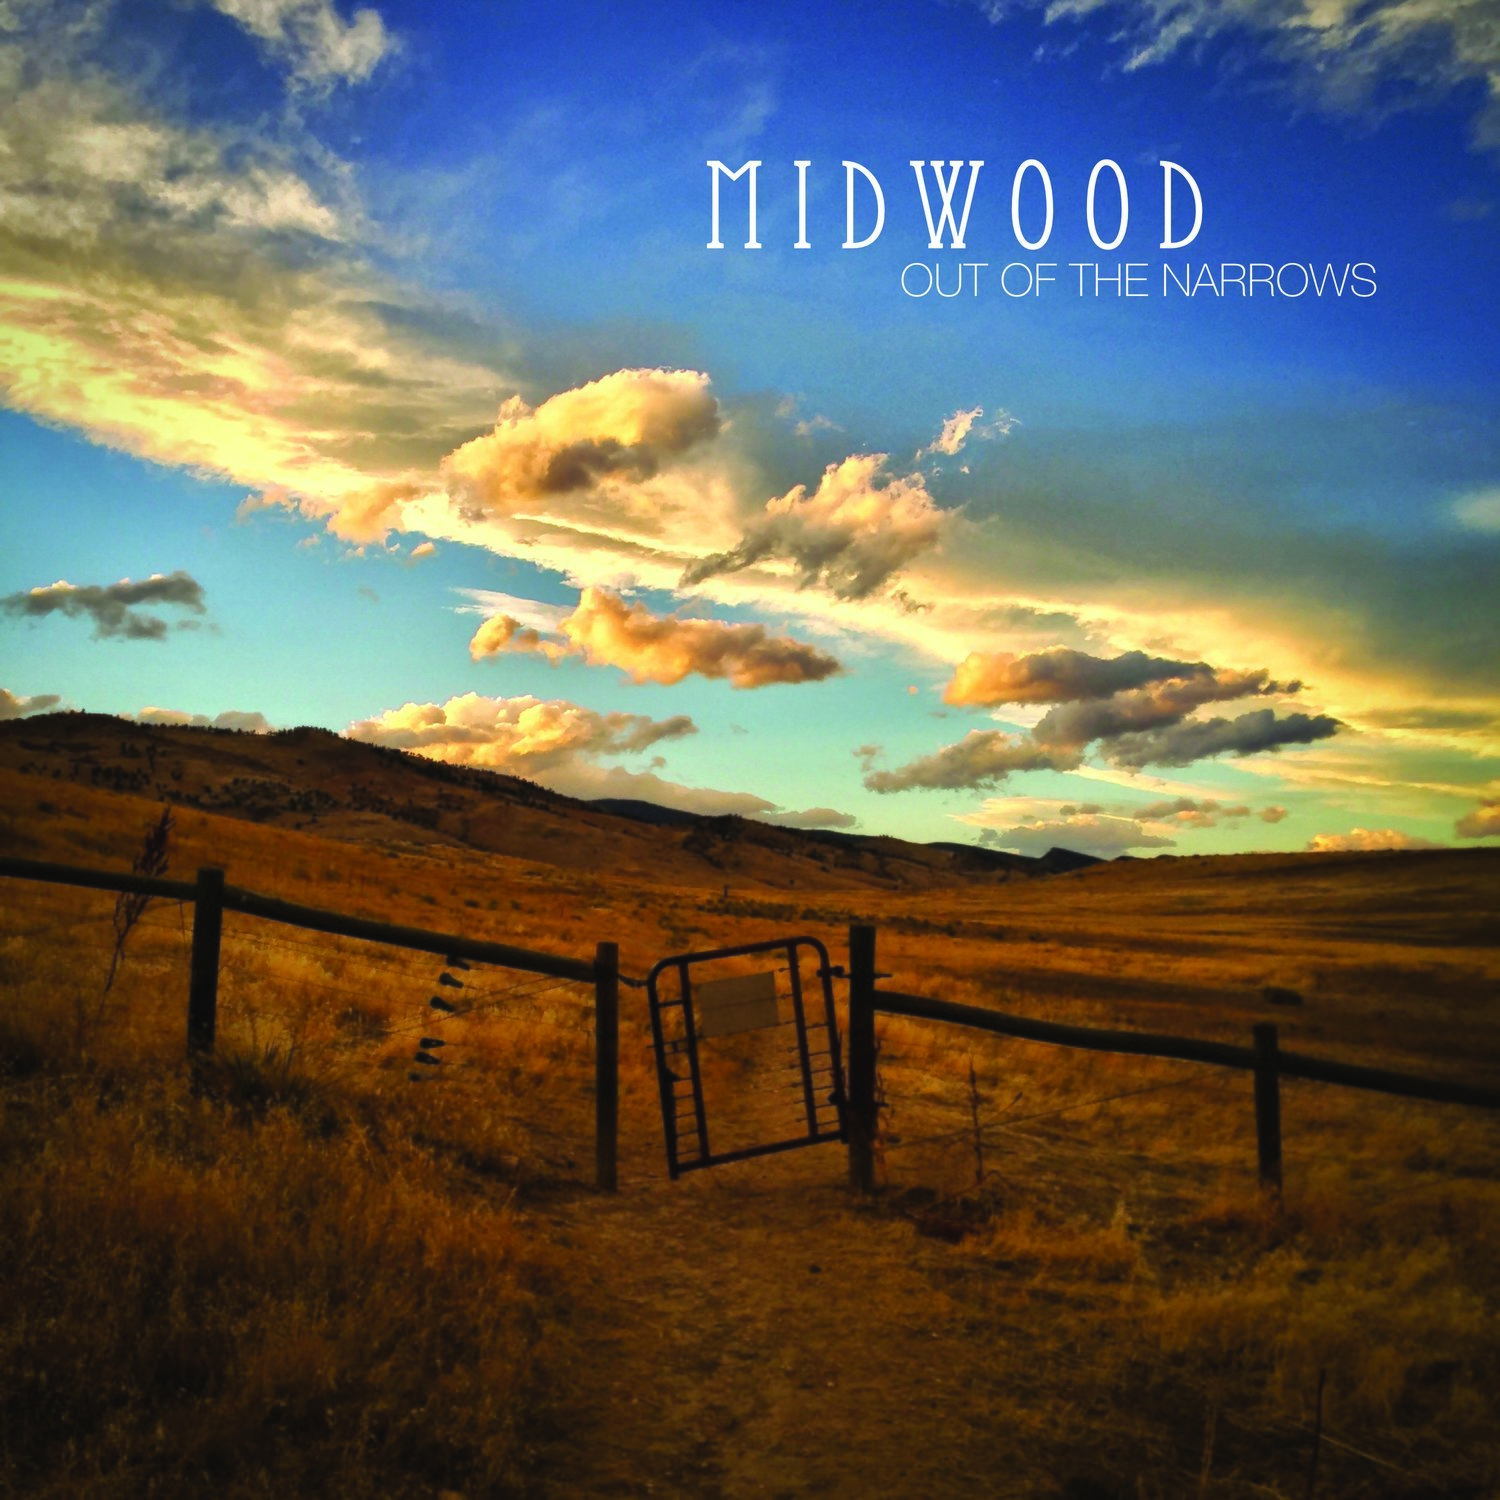 Midwood "Out of the Narrows" CD